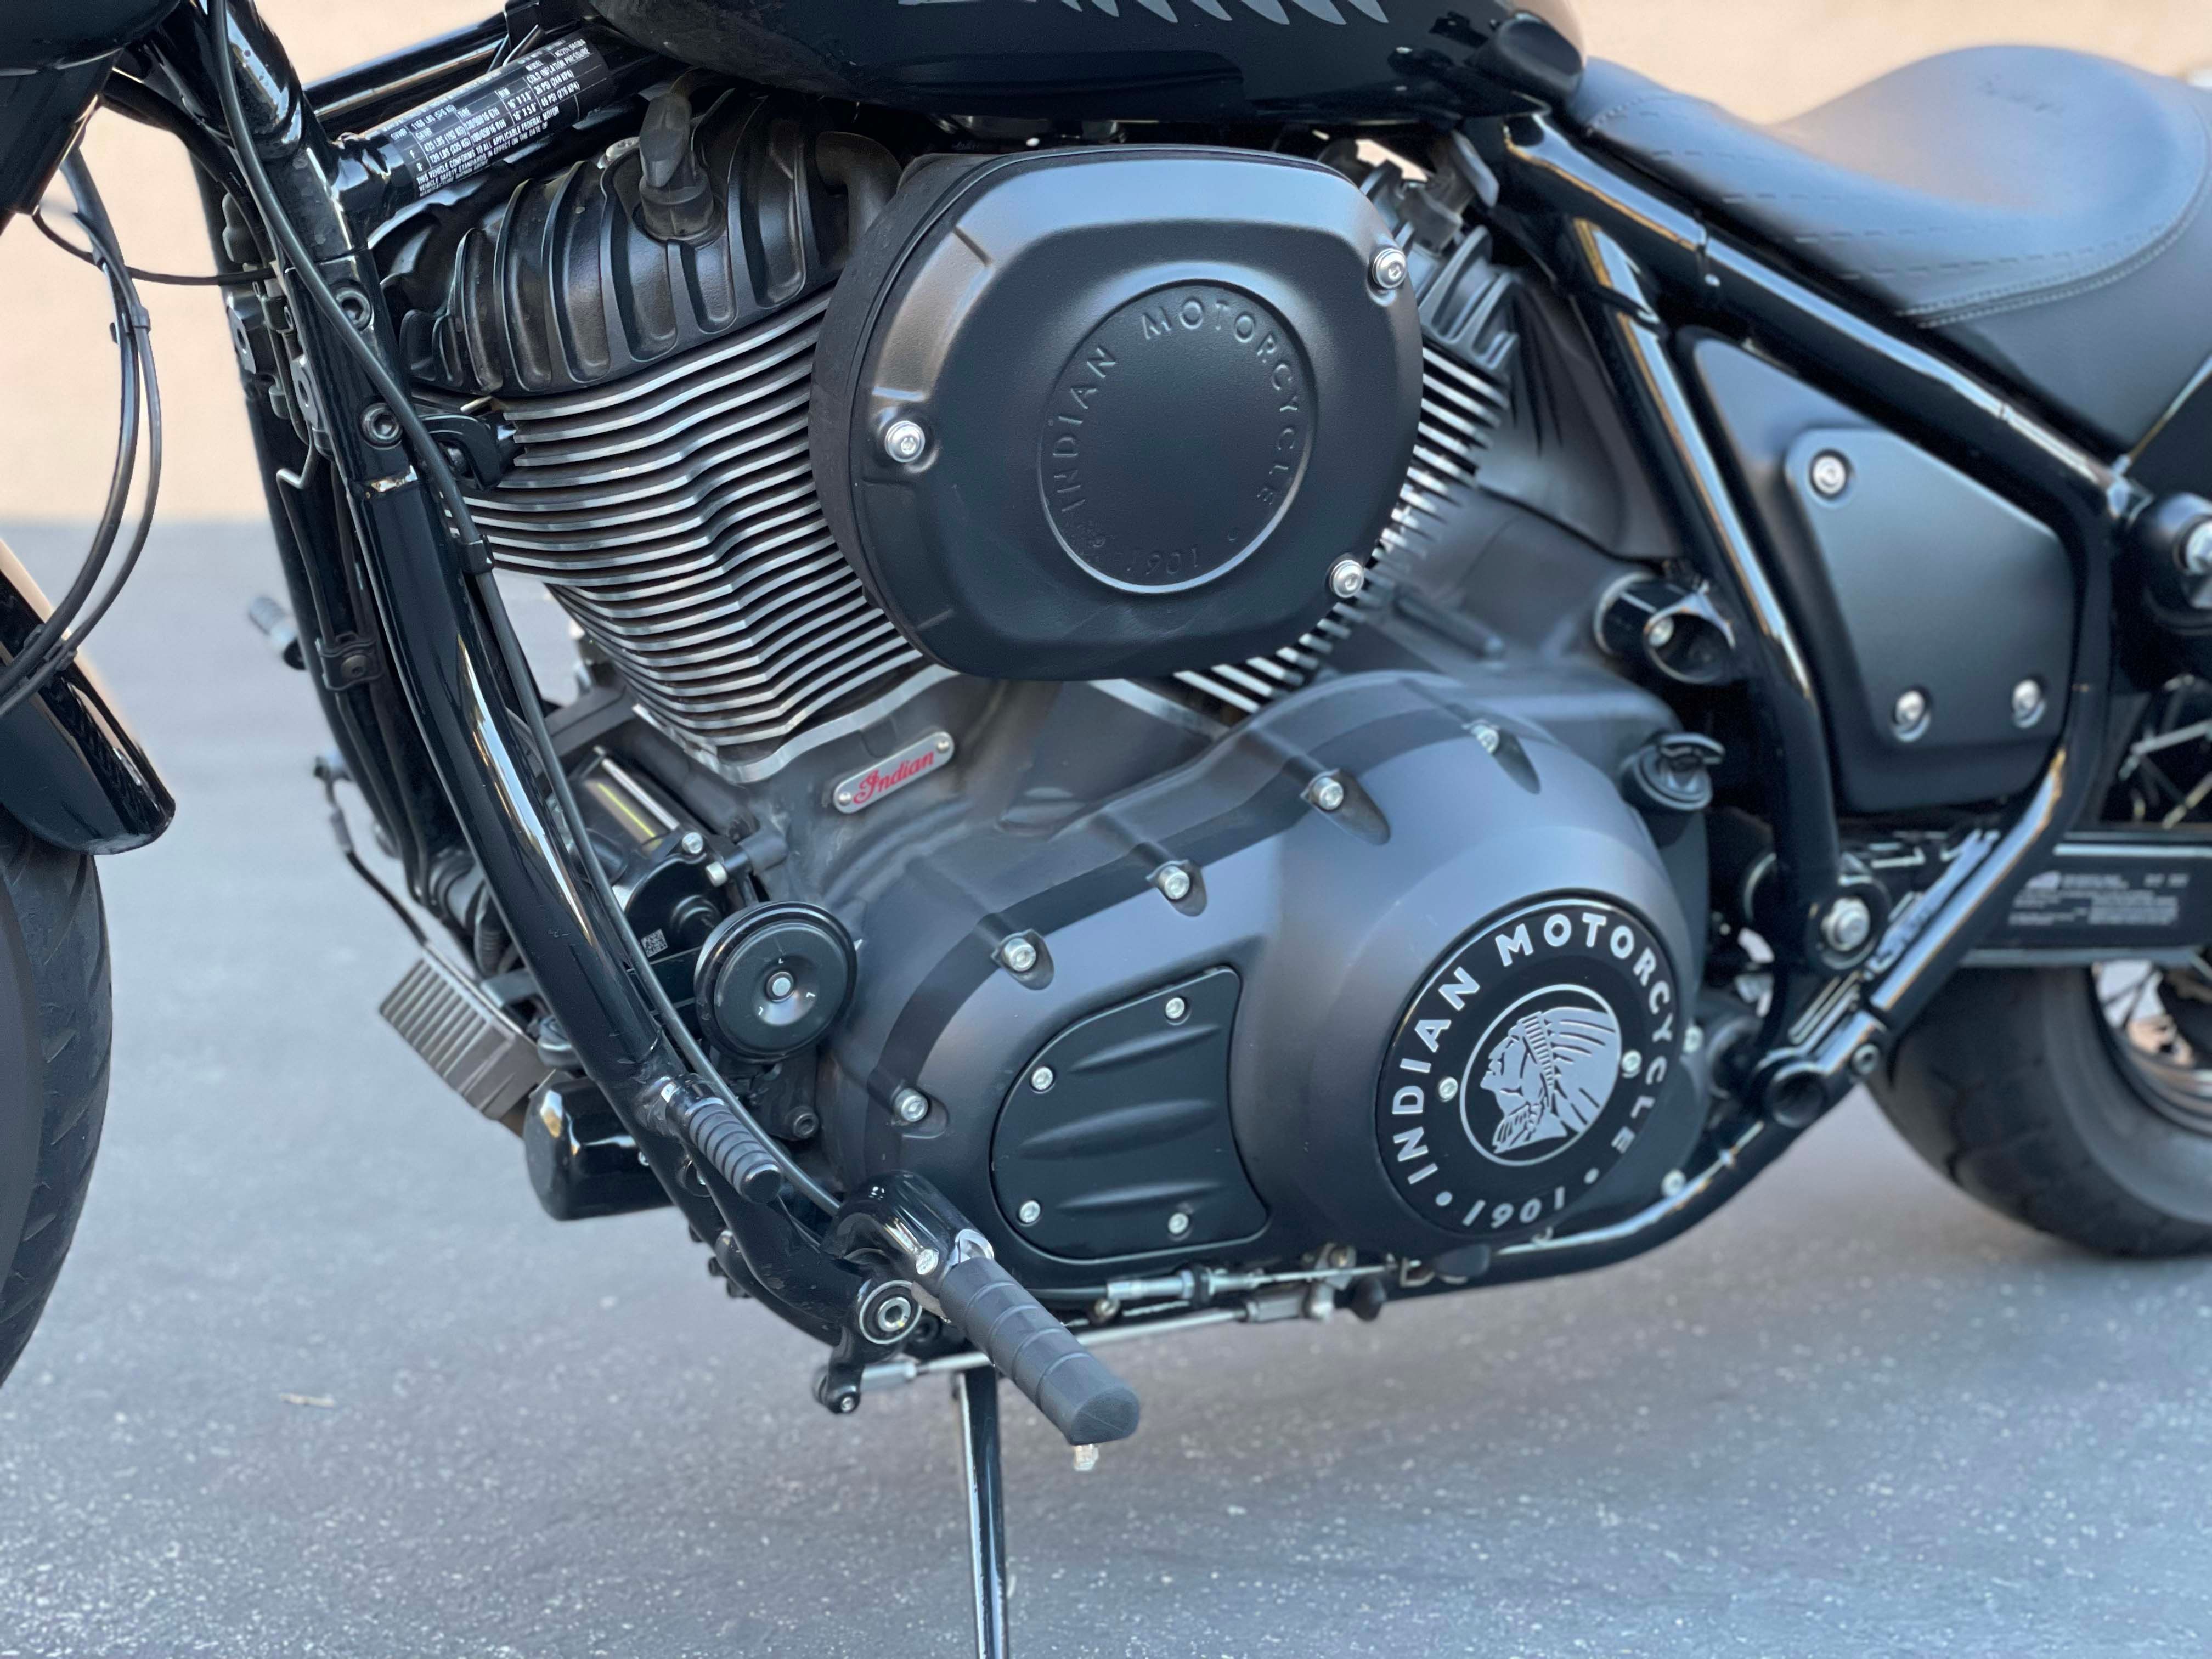 2022 Indian Chief Bobber First Ride Engine